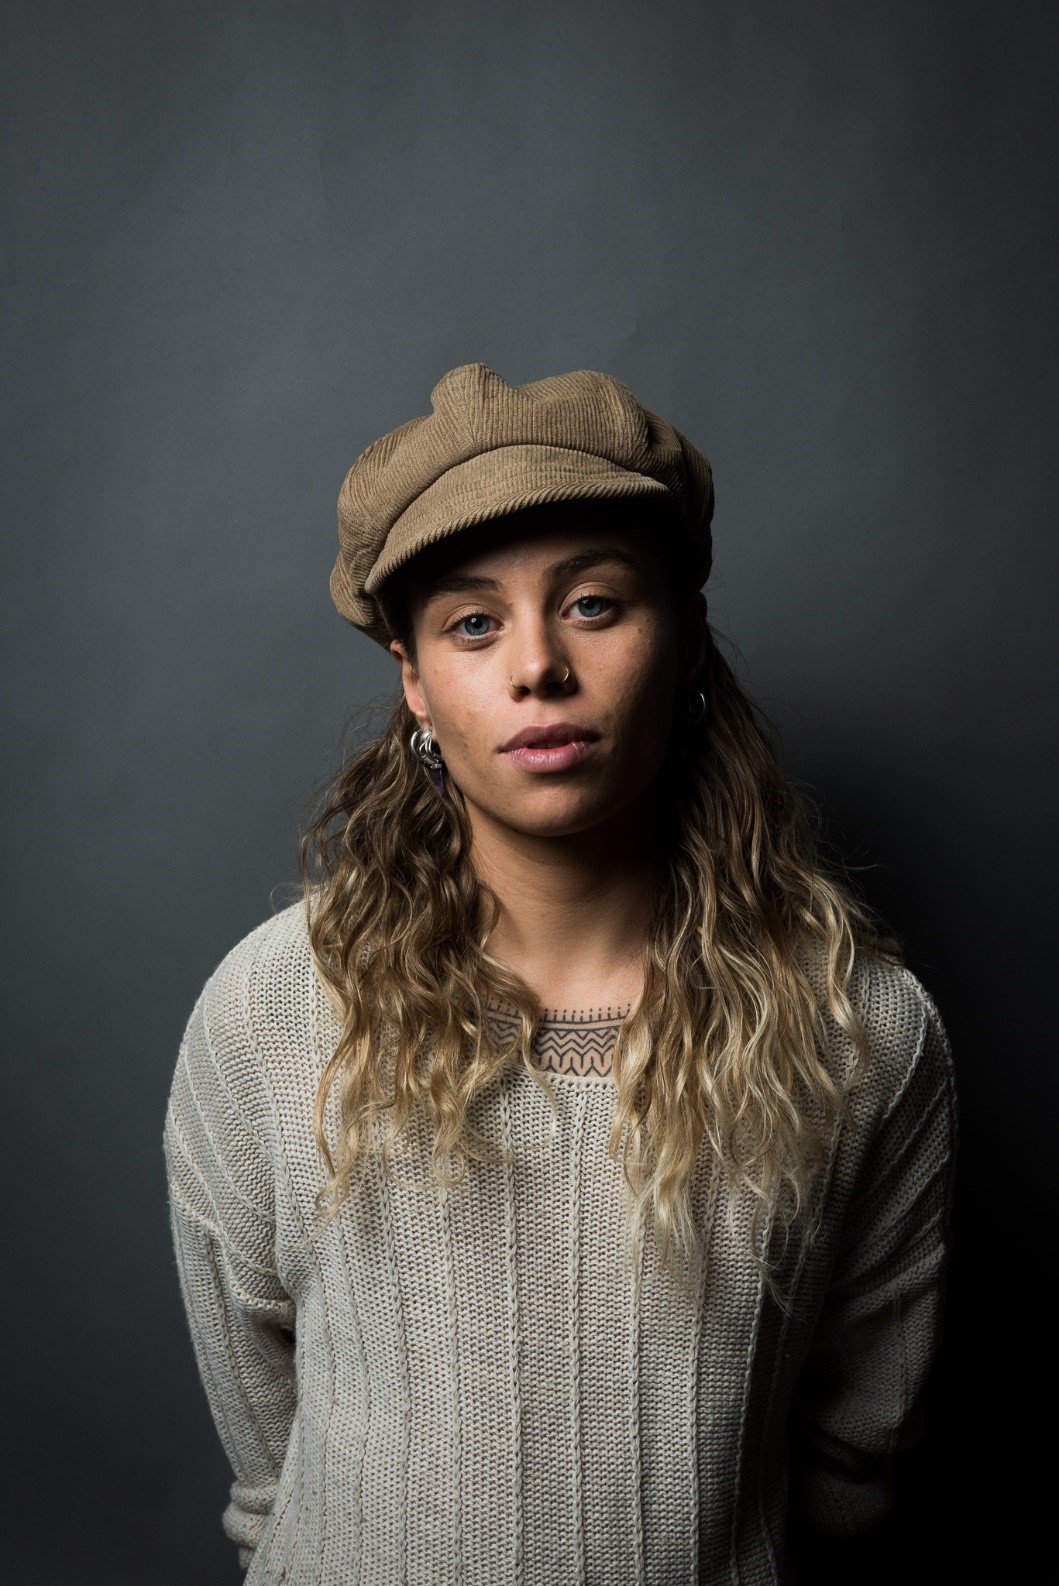 TASH SULTANA’S BRAND NEW SINGLE ‘MURDER TO THE MIND’ AVAILABLE NOW!